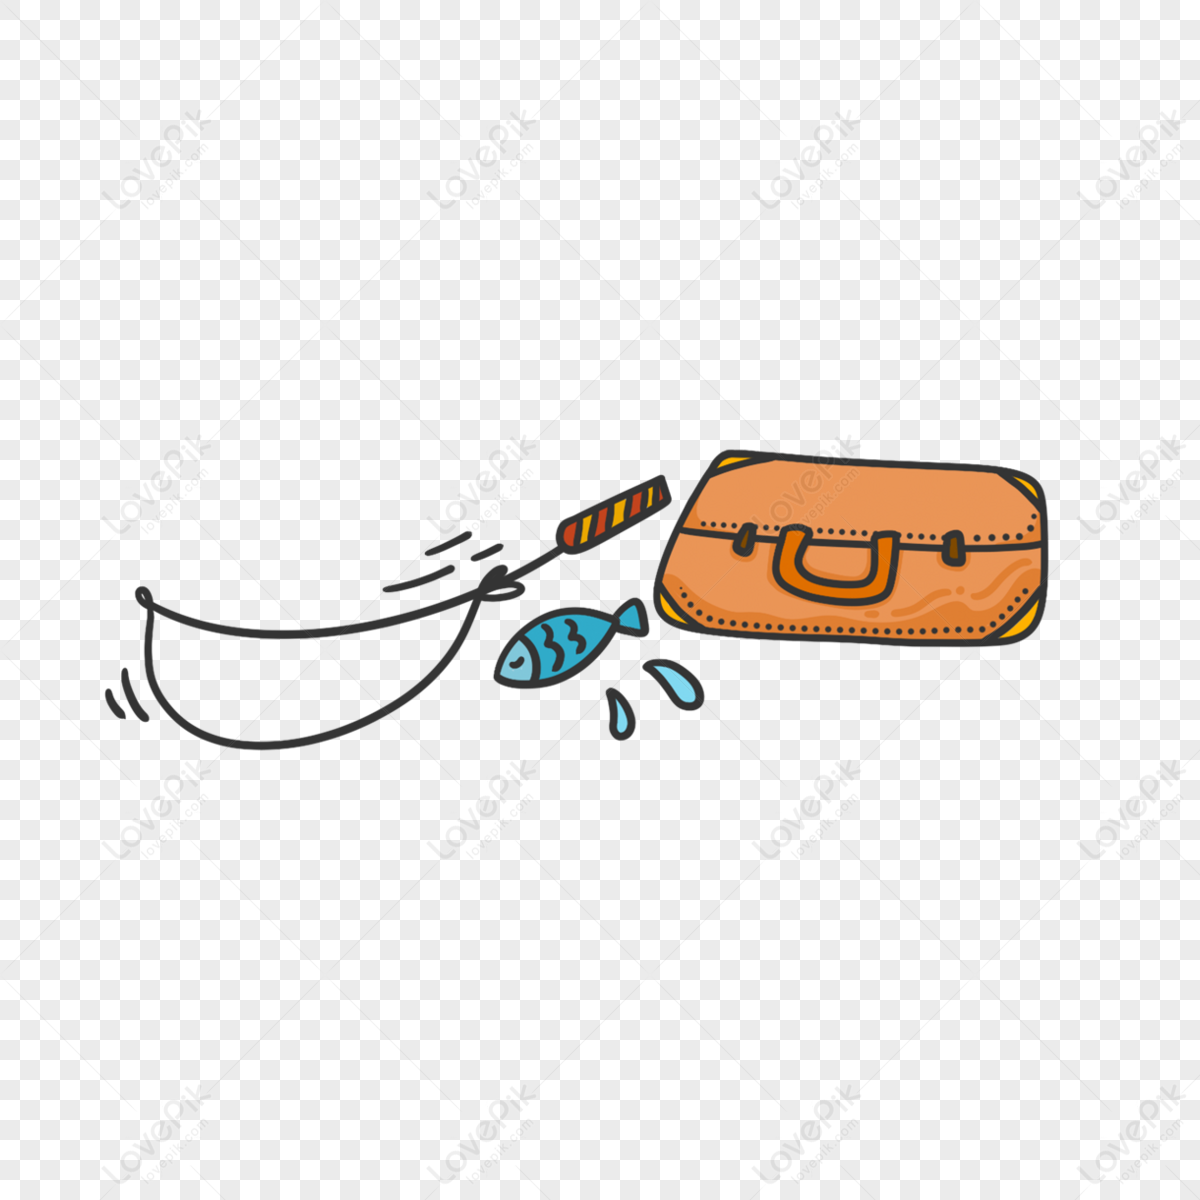 Fishing Rod Cartoon PNG Images With Transparent Background